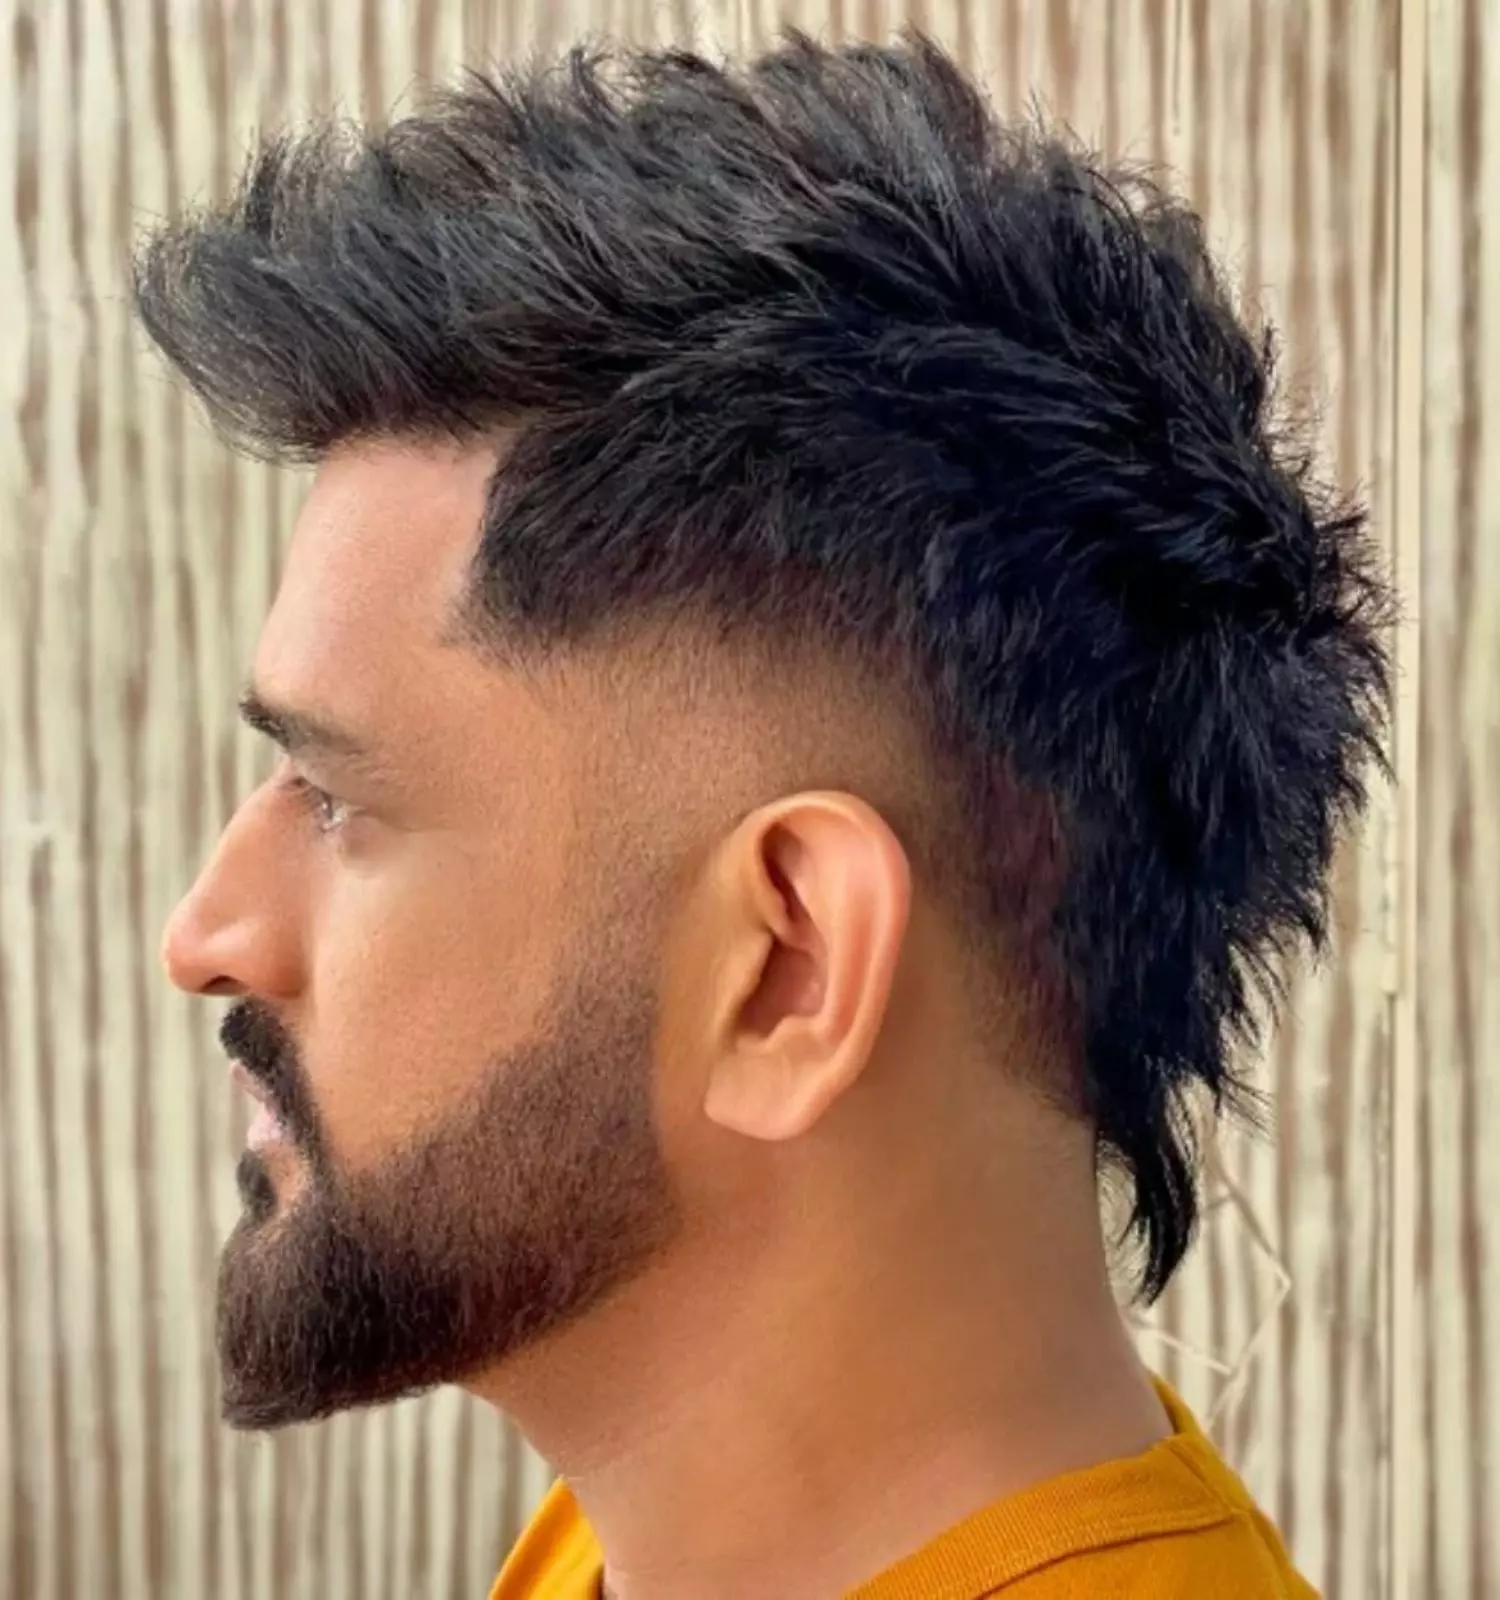 Virat's Kohli's haircut always gives us major summer vibes, thanks to the  side buzz cut. Boys, want a hairdo that's fuss-free and l... | Instagram